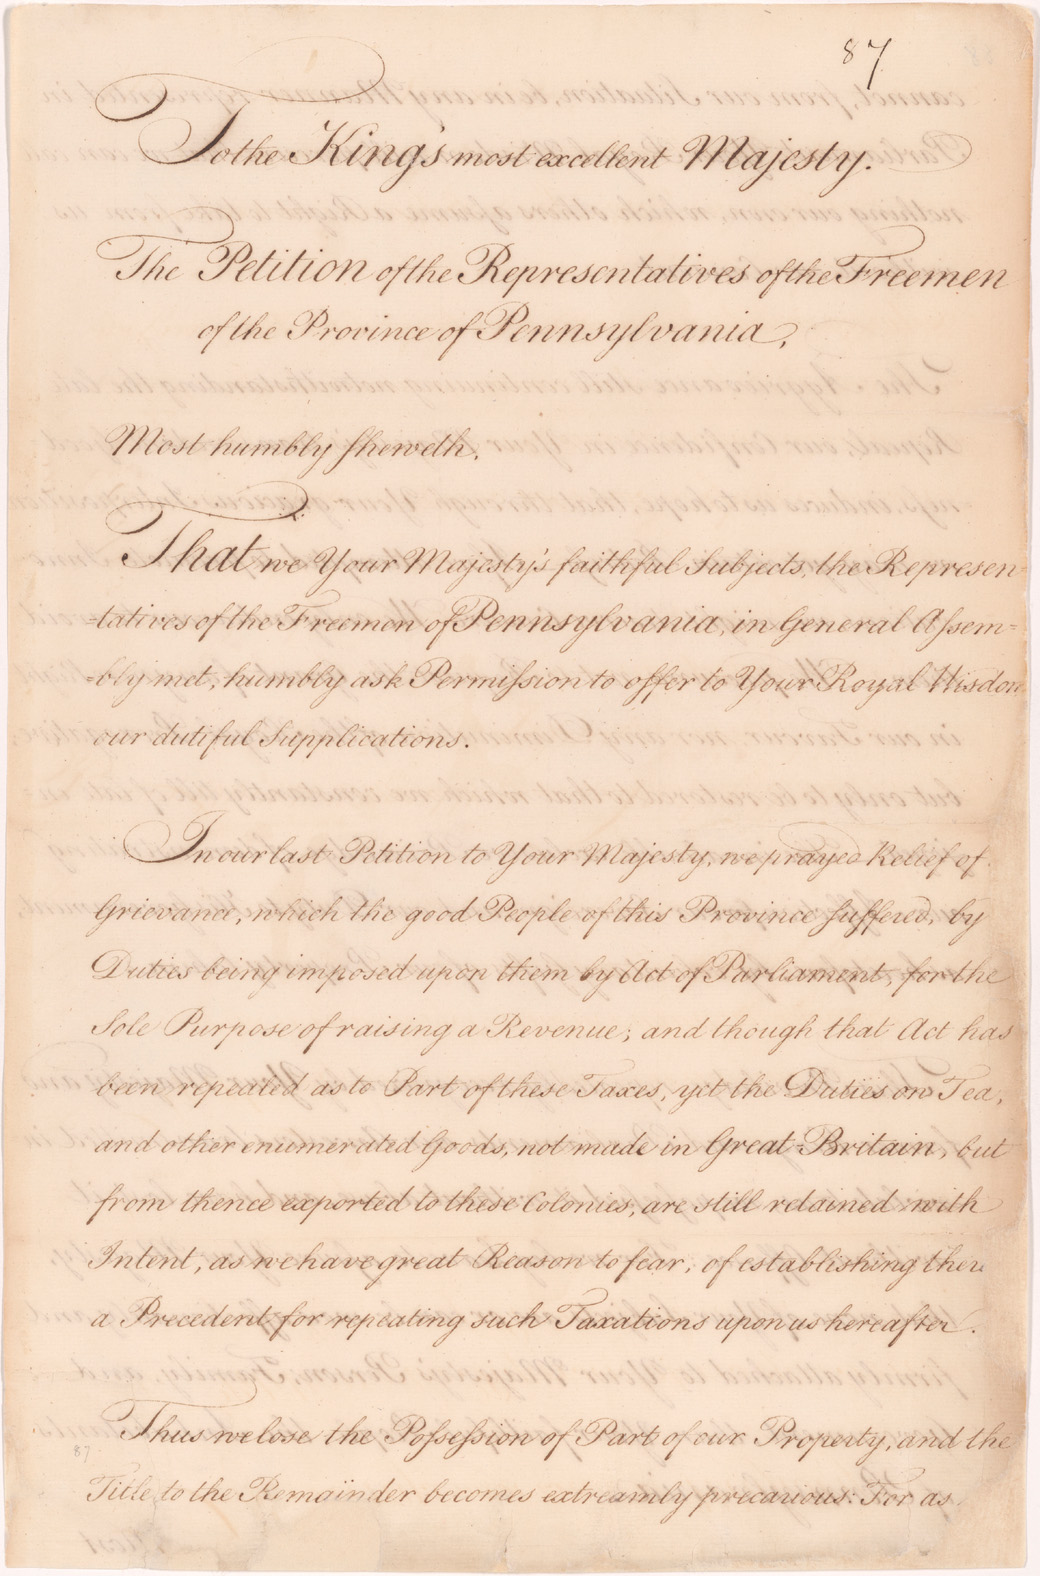 Petition of the Pennsylvania Provincial Assembly to the King of England